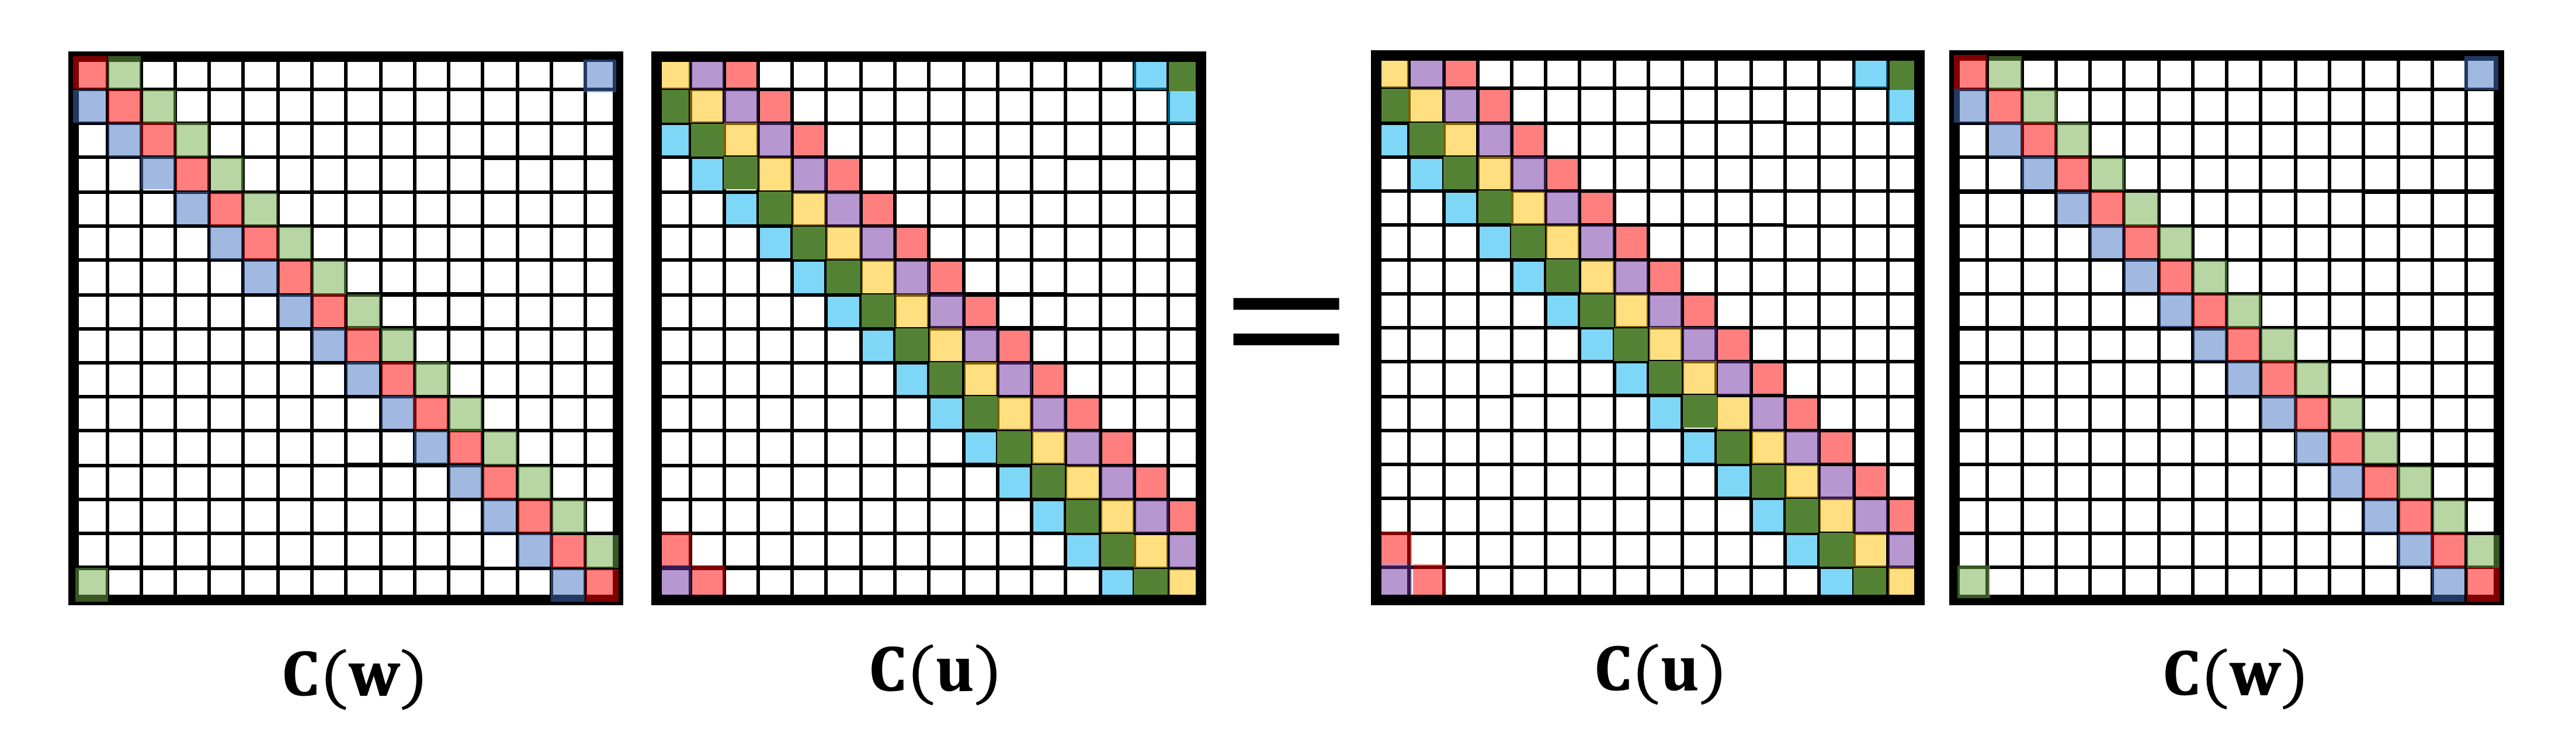 Deriving Convolution From First Principles By Michael Bronstein Towards Data Science